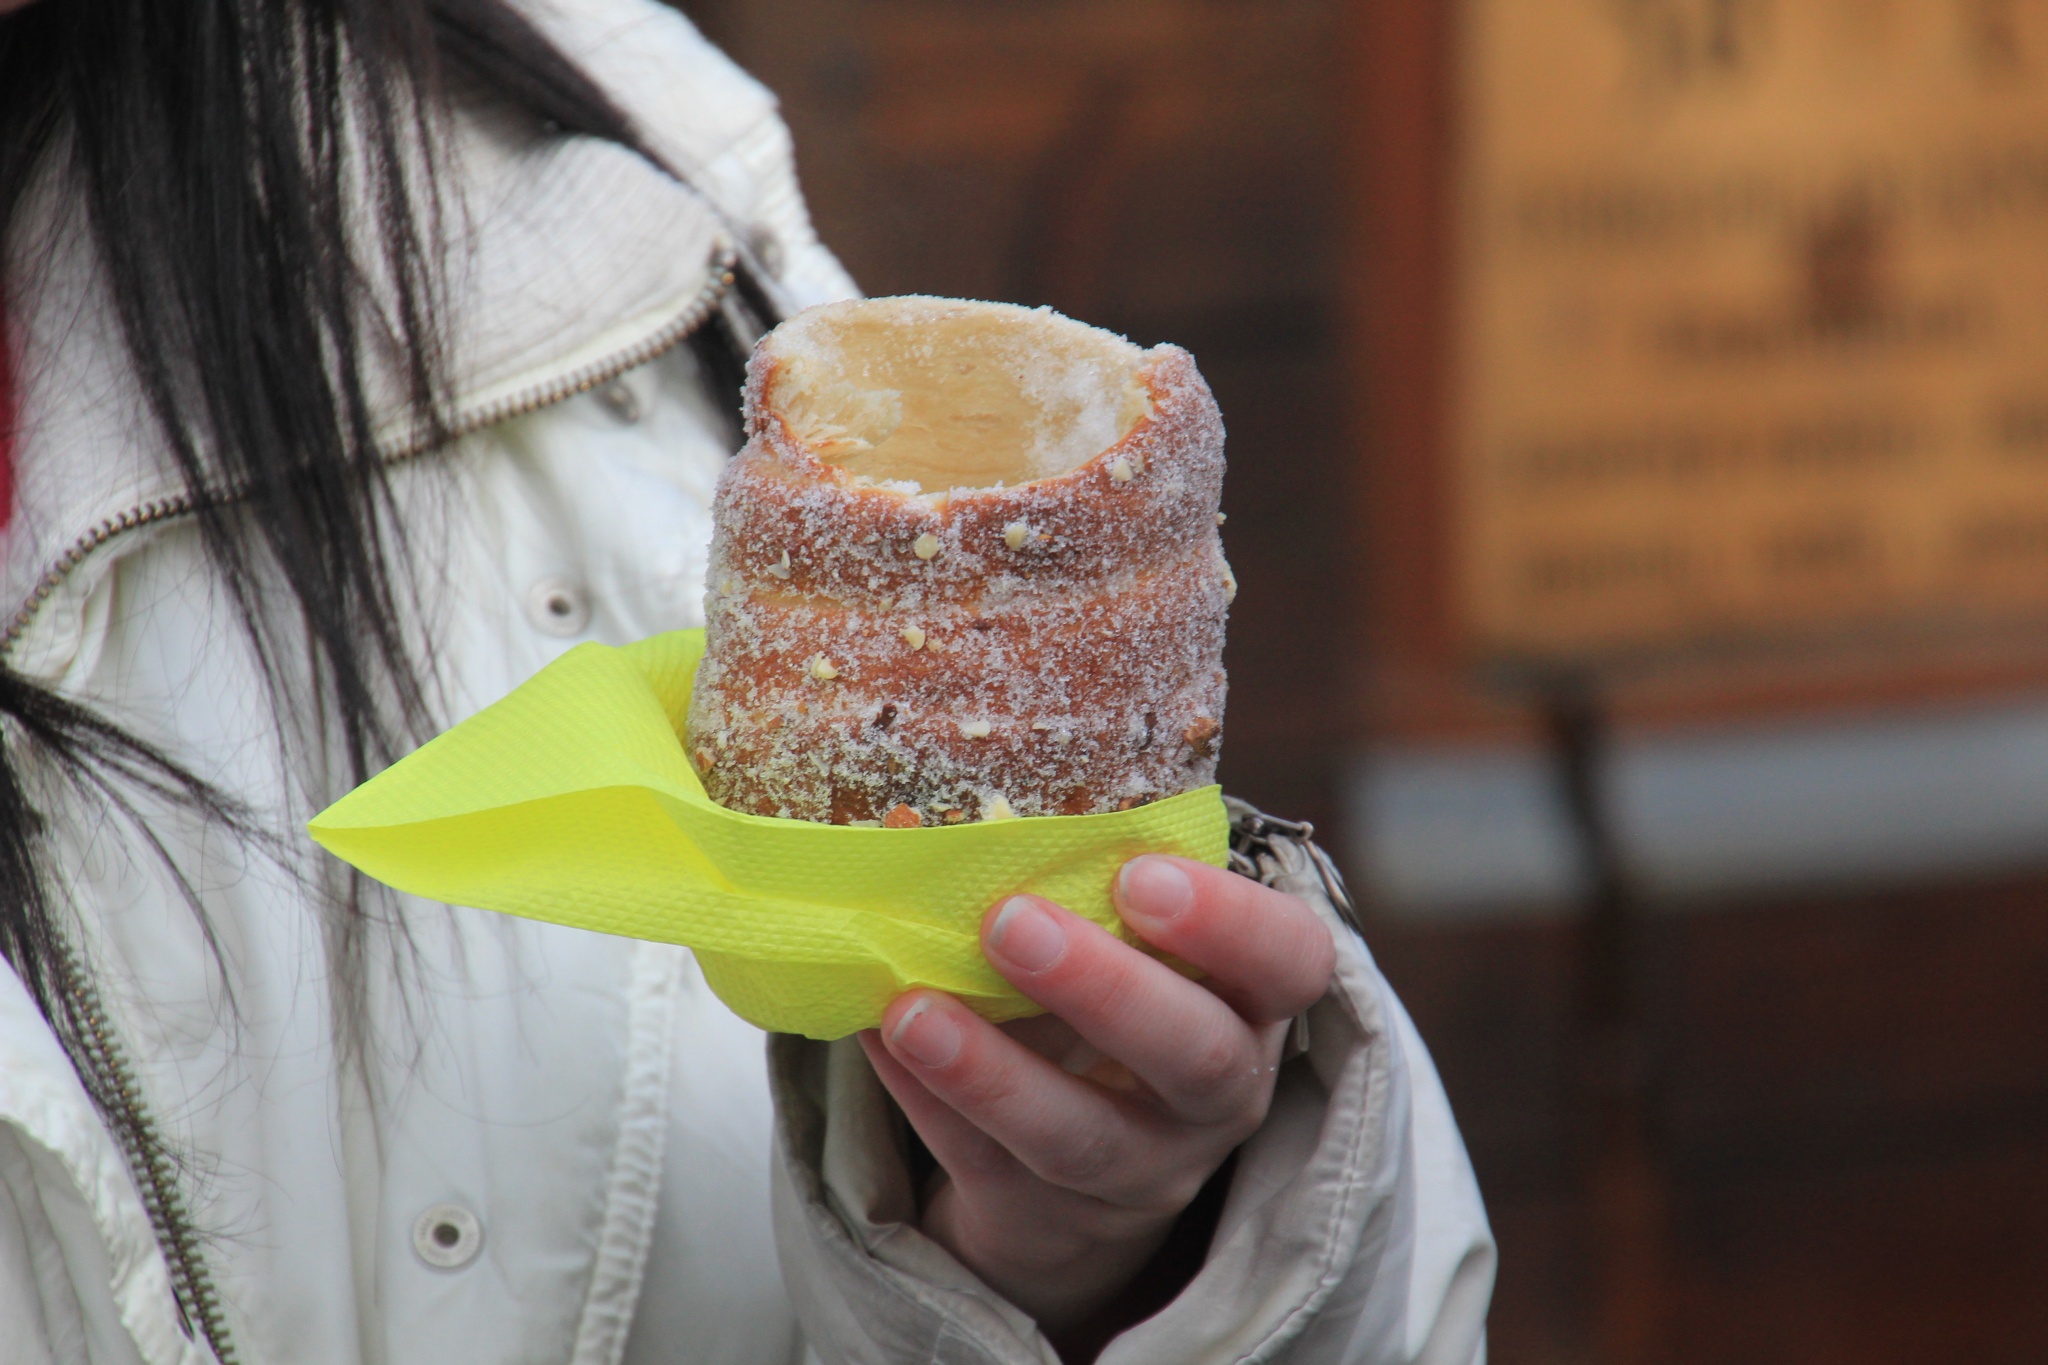 A woman in a white jacket eats a trdelnik in Prague's Old Town Square.